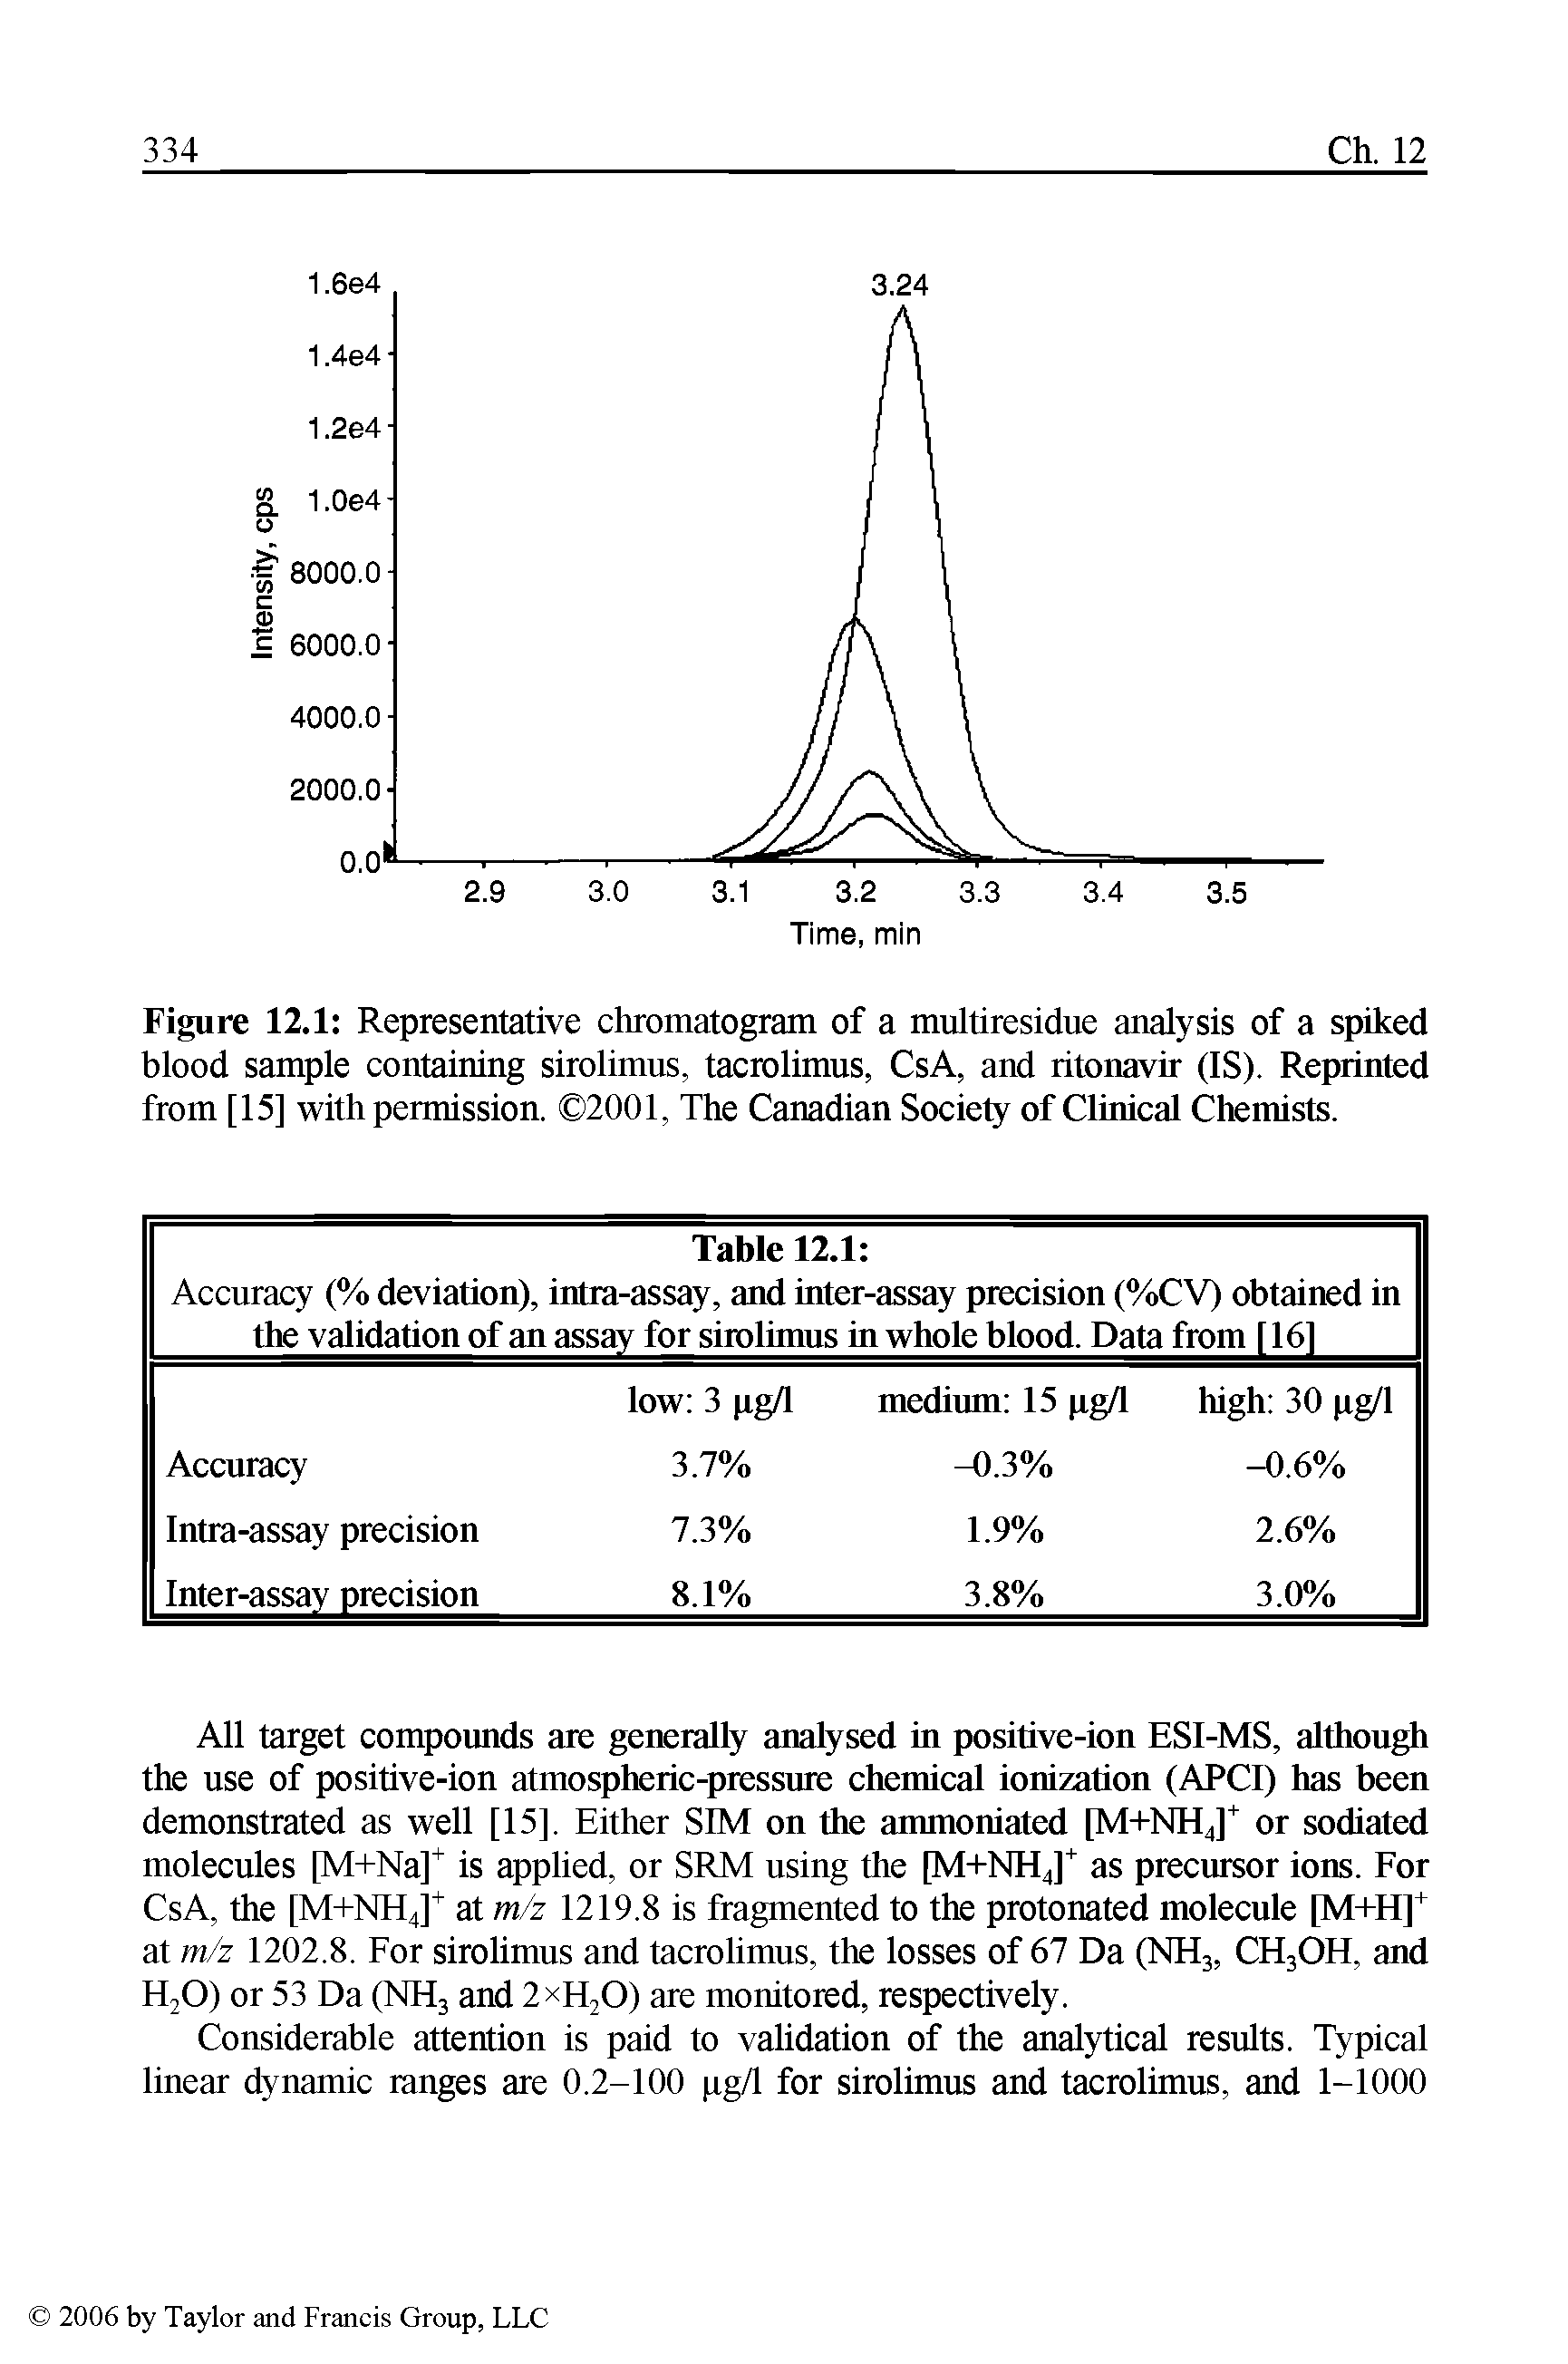 Figure 12.1 Representative chromatogram of a multiresidue analysis of a spiked blood sample containing sirolimus, tacrolimus, CsA, and ritonavir (IS). Reprinted from [15] with permission. 2001, The Canadian Society of Clinical Chemists.